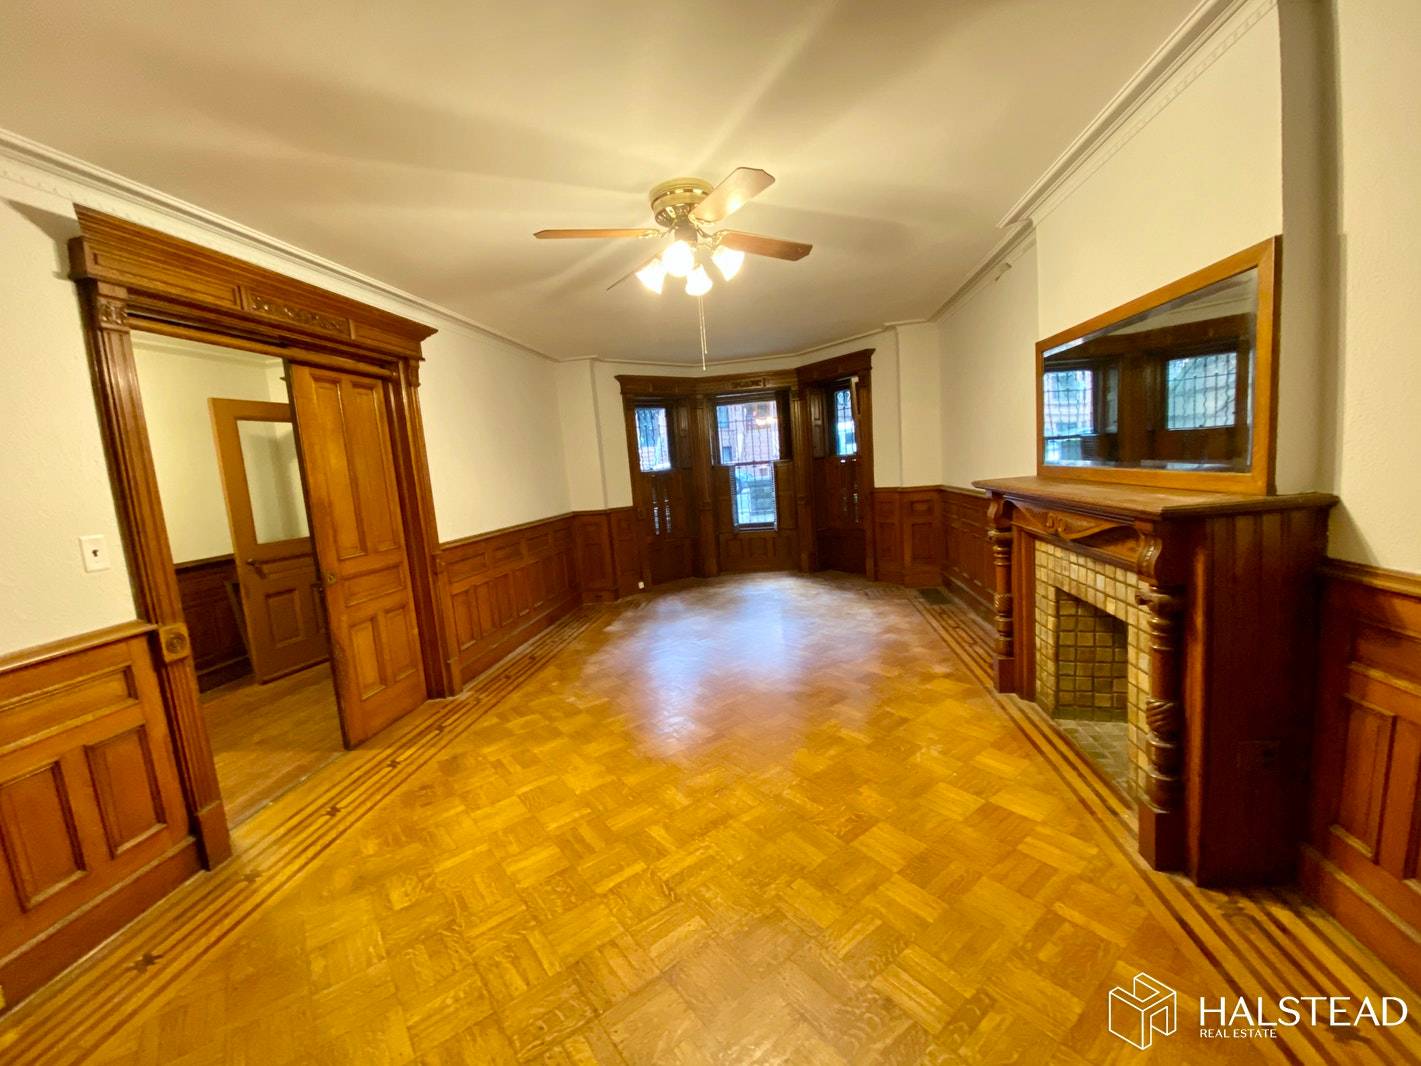 Two bedroom in a classic owner occupied Park Slope brownstone on a beautiful tree lined street.